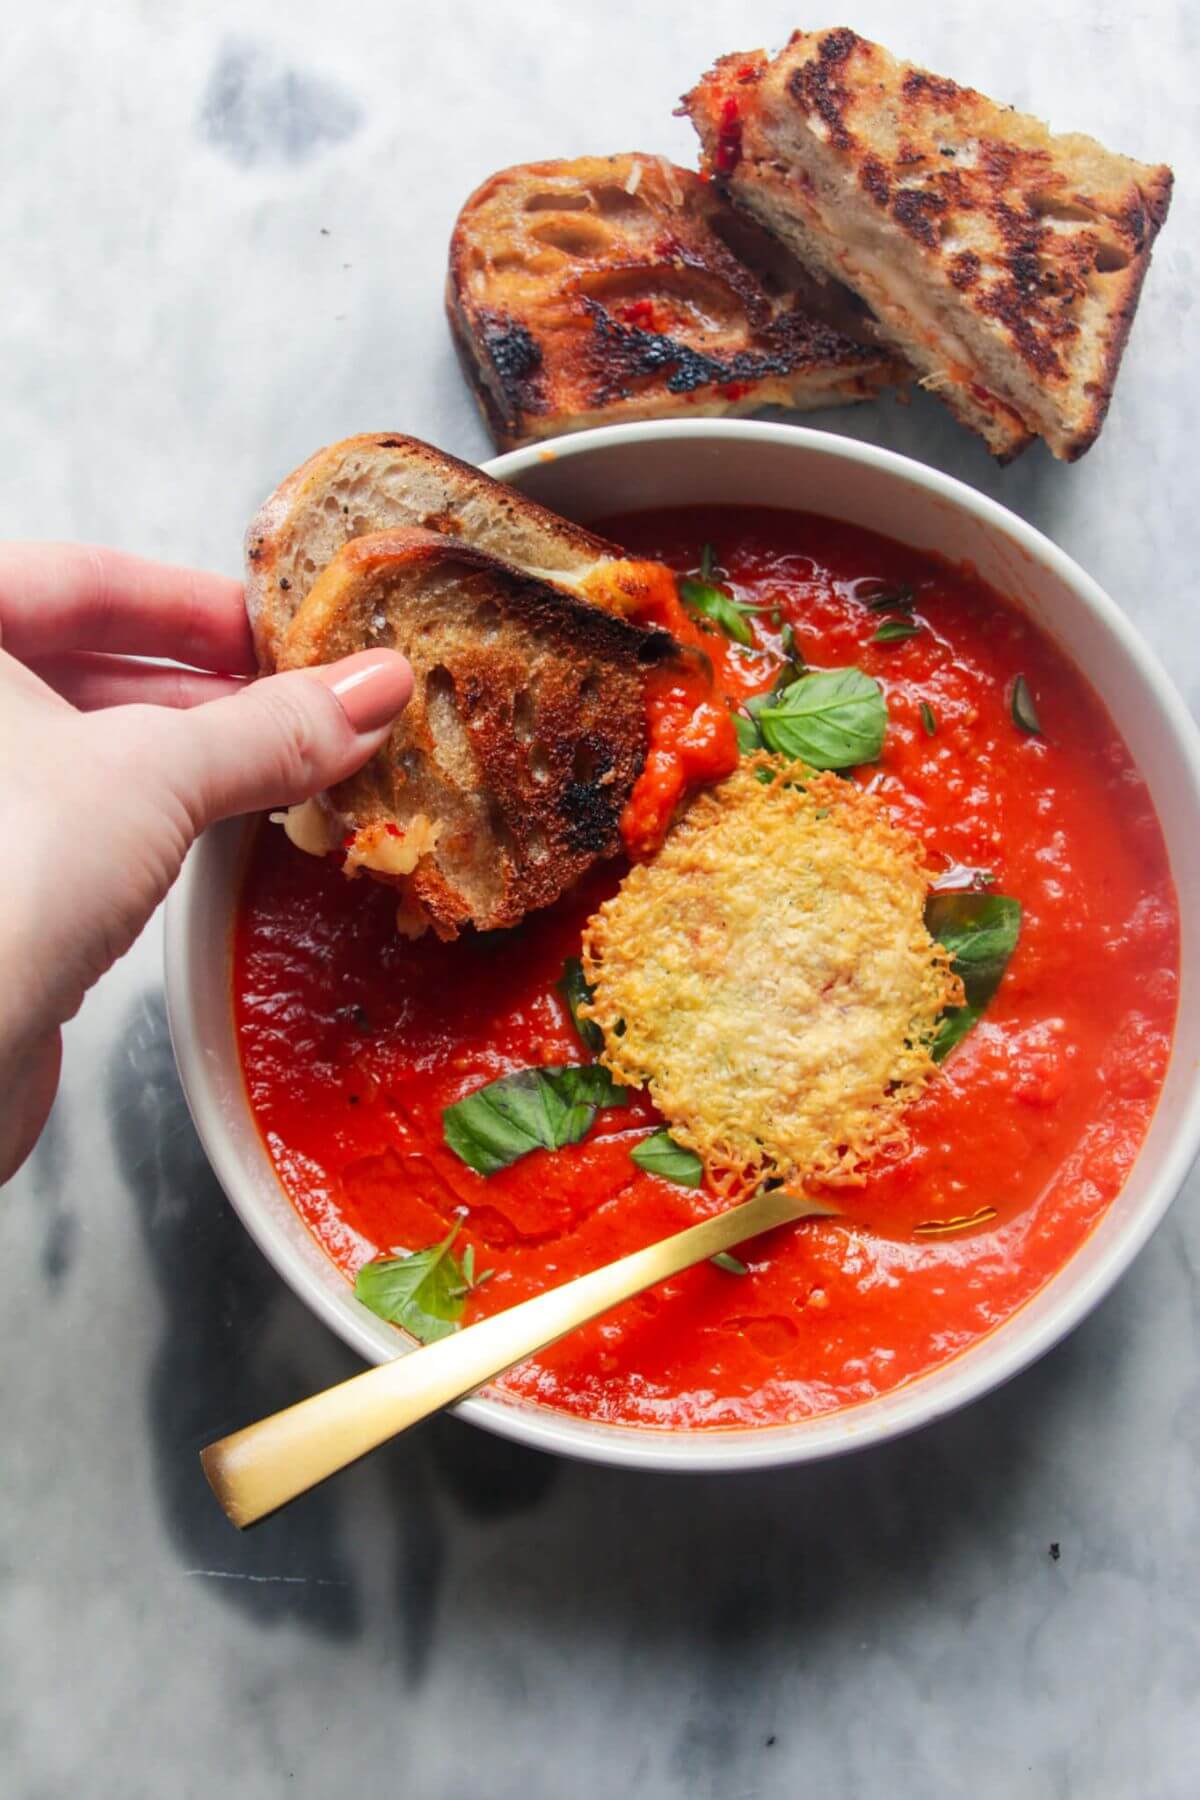 Hand dipping grilled cheese into tomato and red pepper soup on a grey marble background.